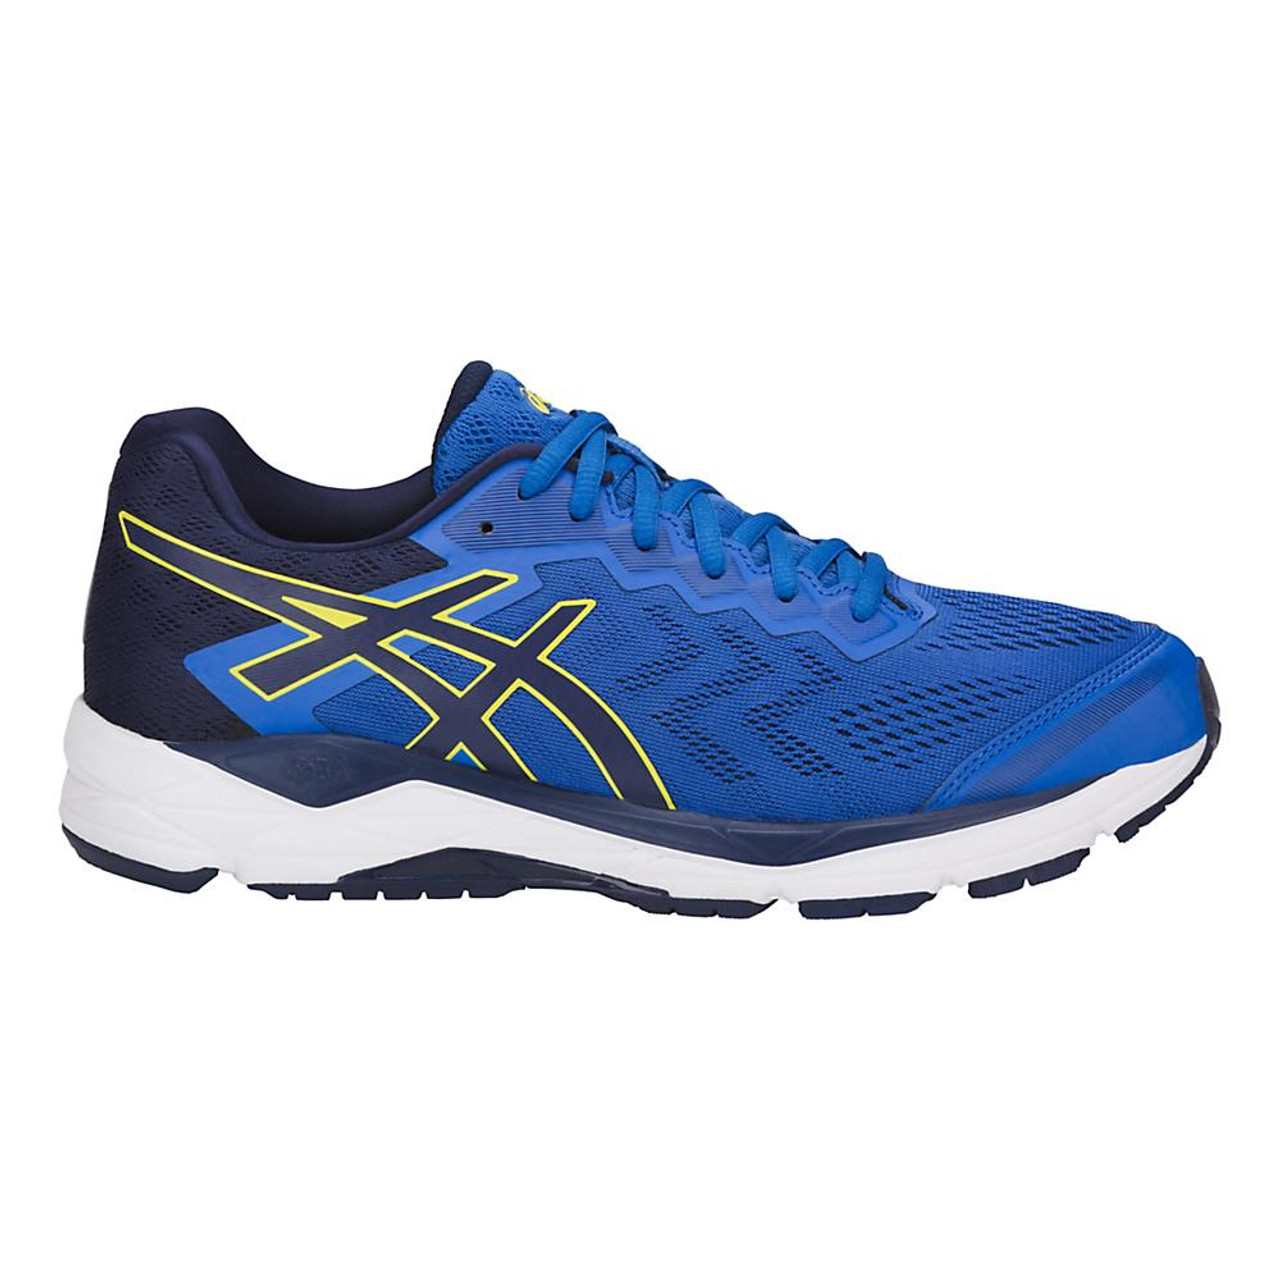 ASICS GEL-Fortitude 8 Running Shoes 